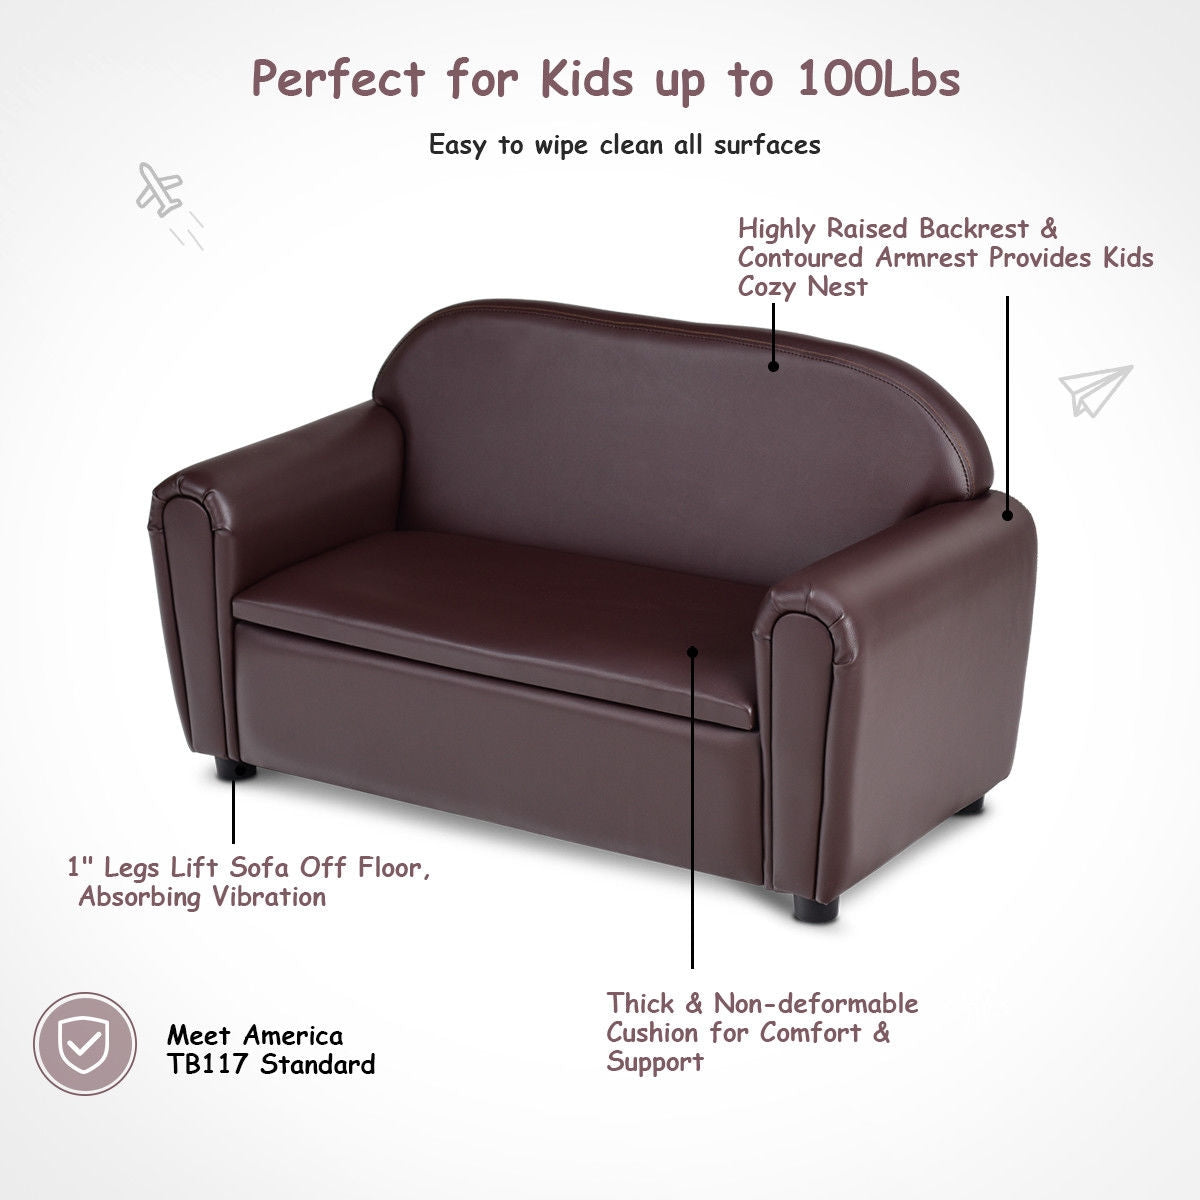 Child-Sized Sofa: Make the perfect furniture choice for your child! Let your kids enjoy their very own furniture designed just for them. Enhance any room with a comfortable seating option that creates a special space for reading, watching TV, or simply relaxing.